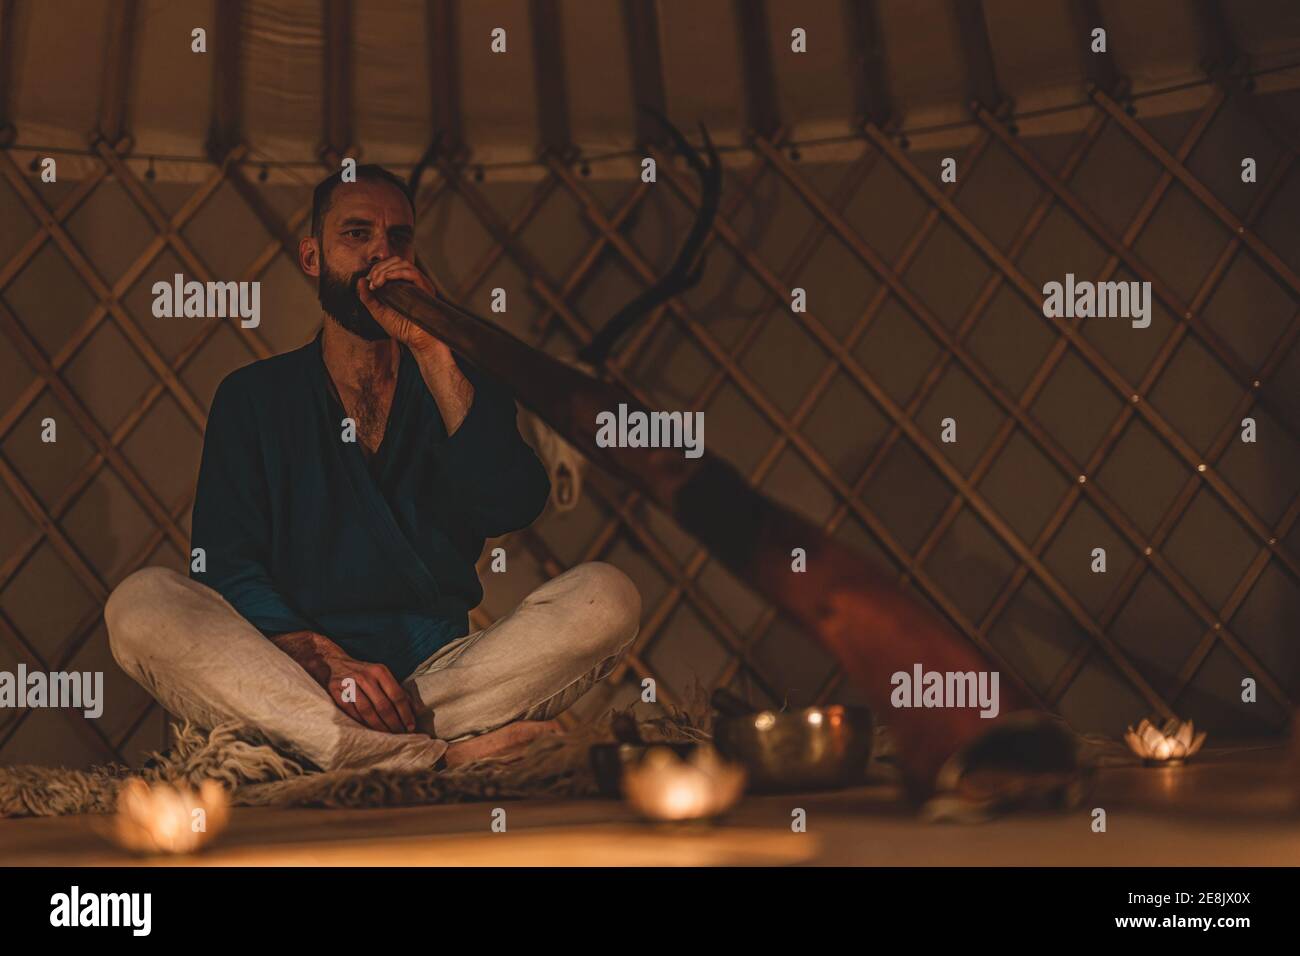 Man playng on didgeridoo by candlelight and tibetian bowl. Stock Photo